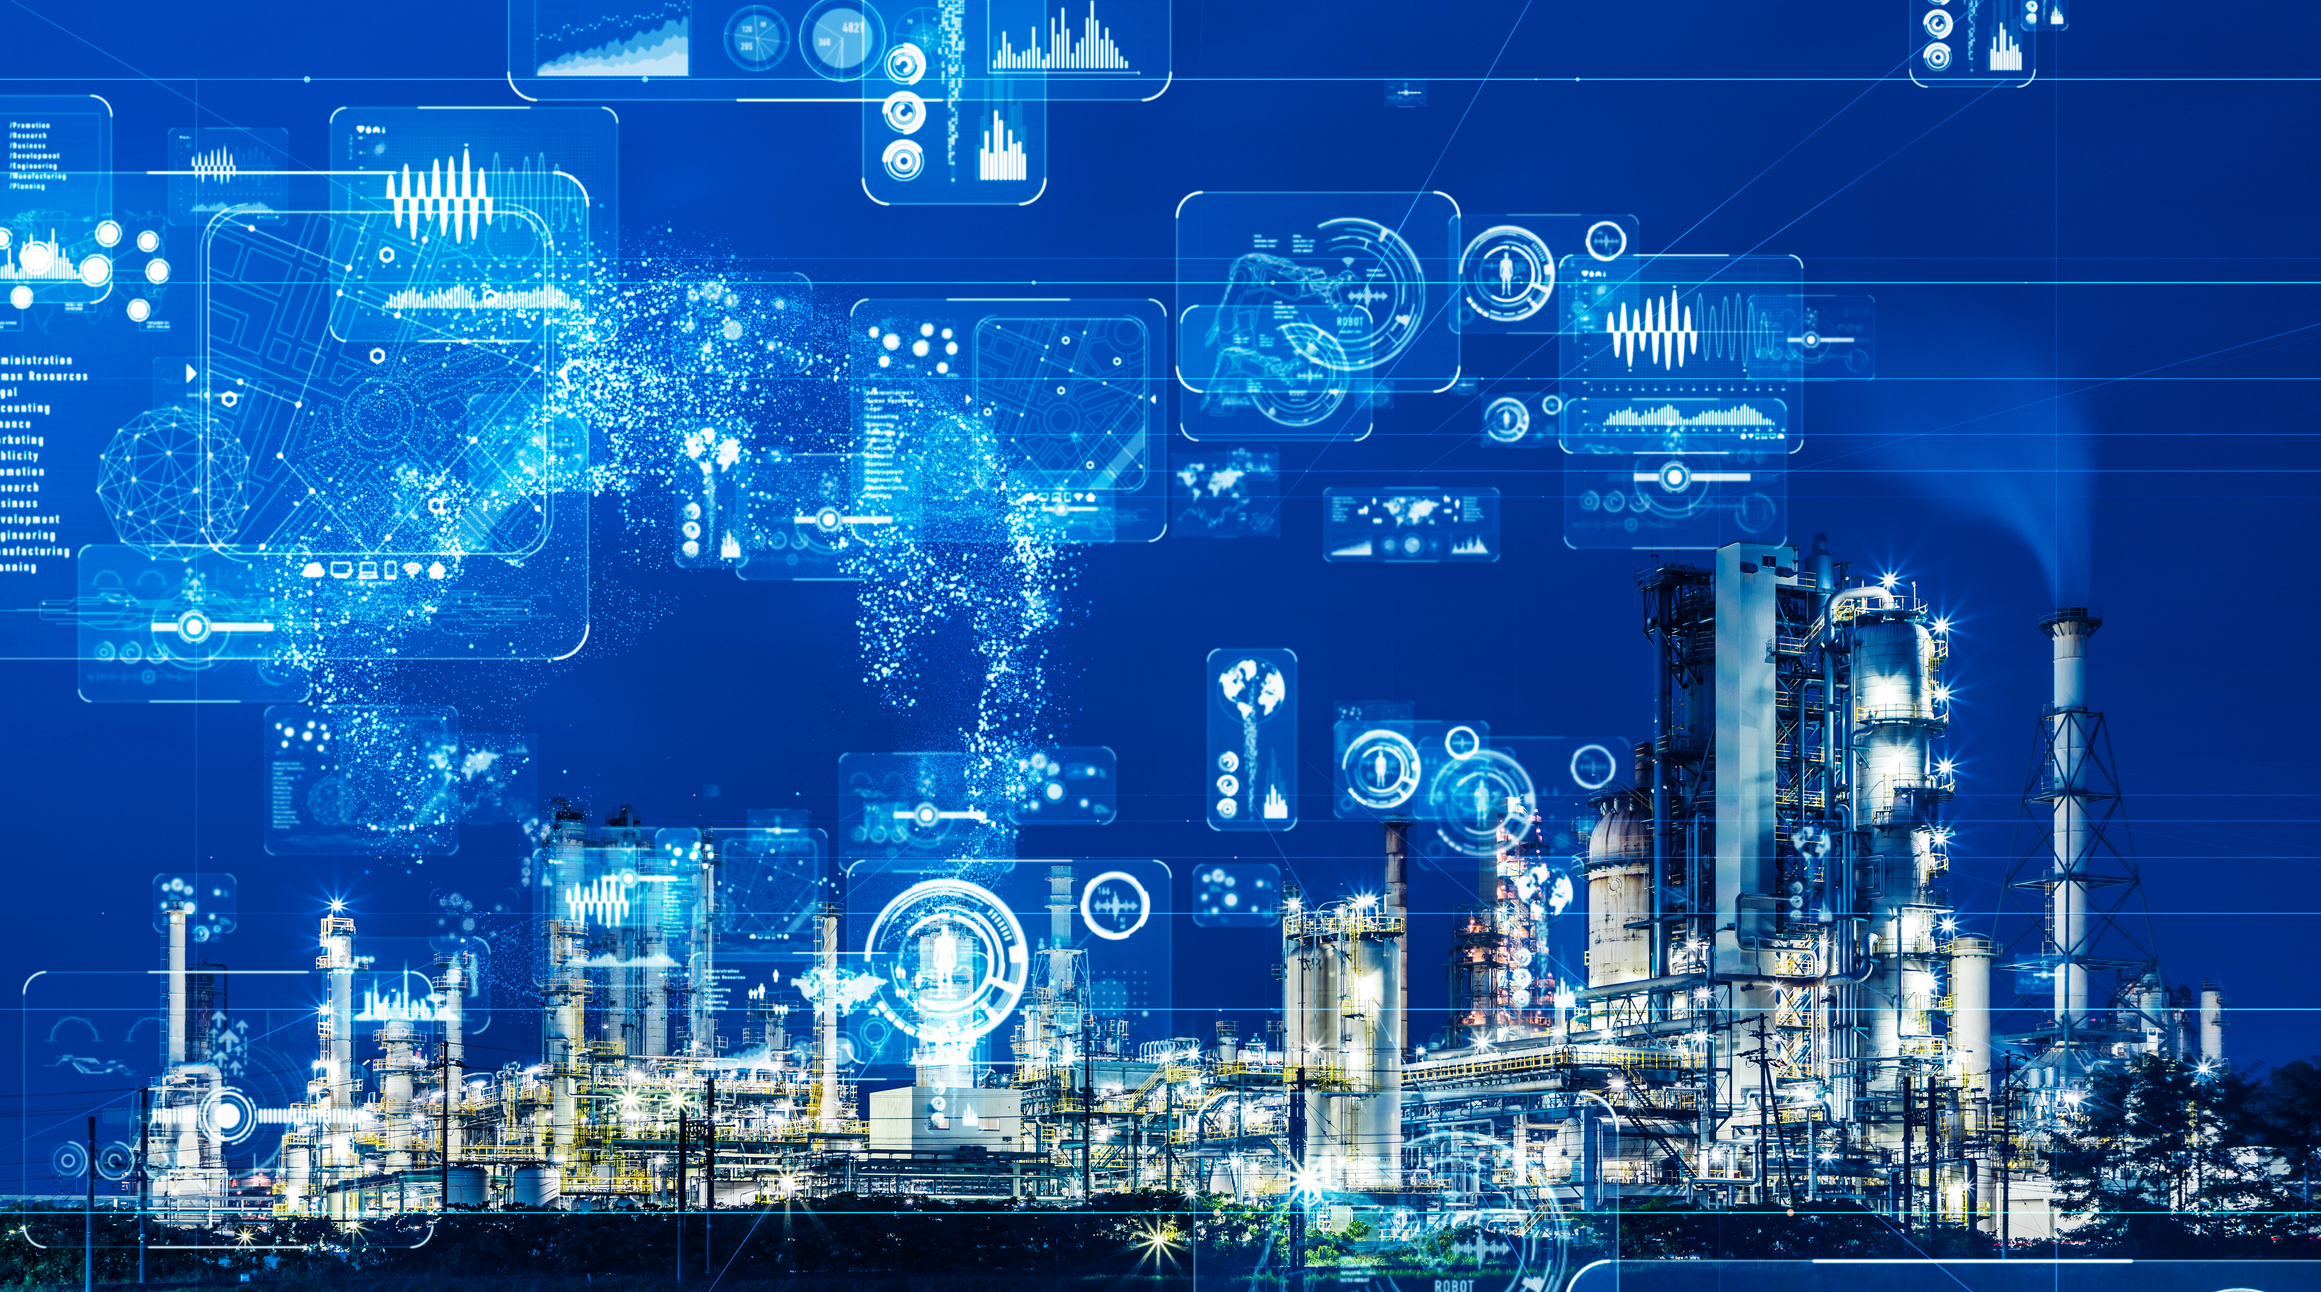 How Machine Learning and Artificial Intelligence Fits into the Future of Energy